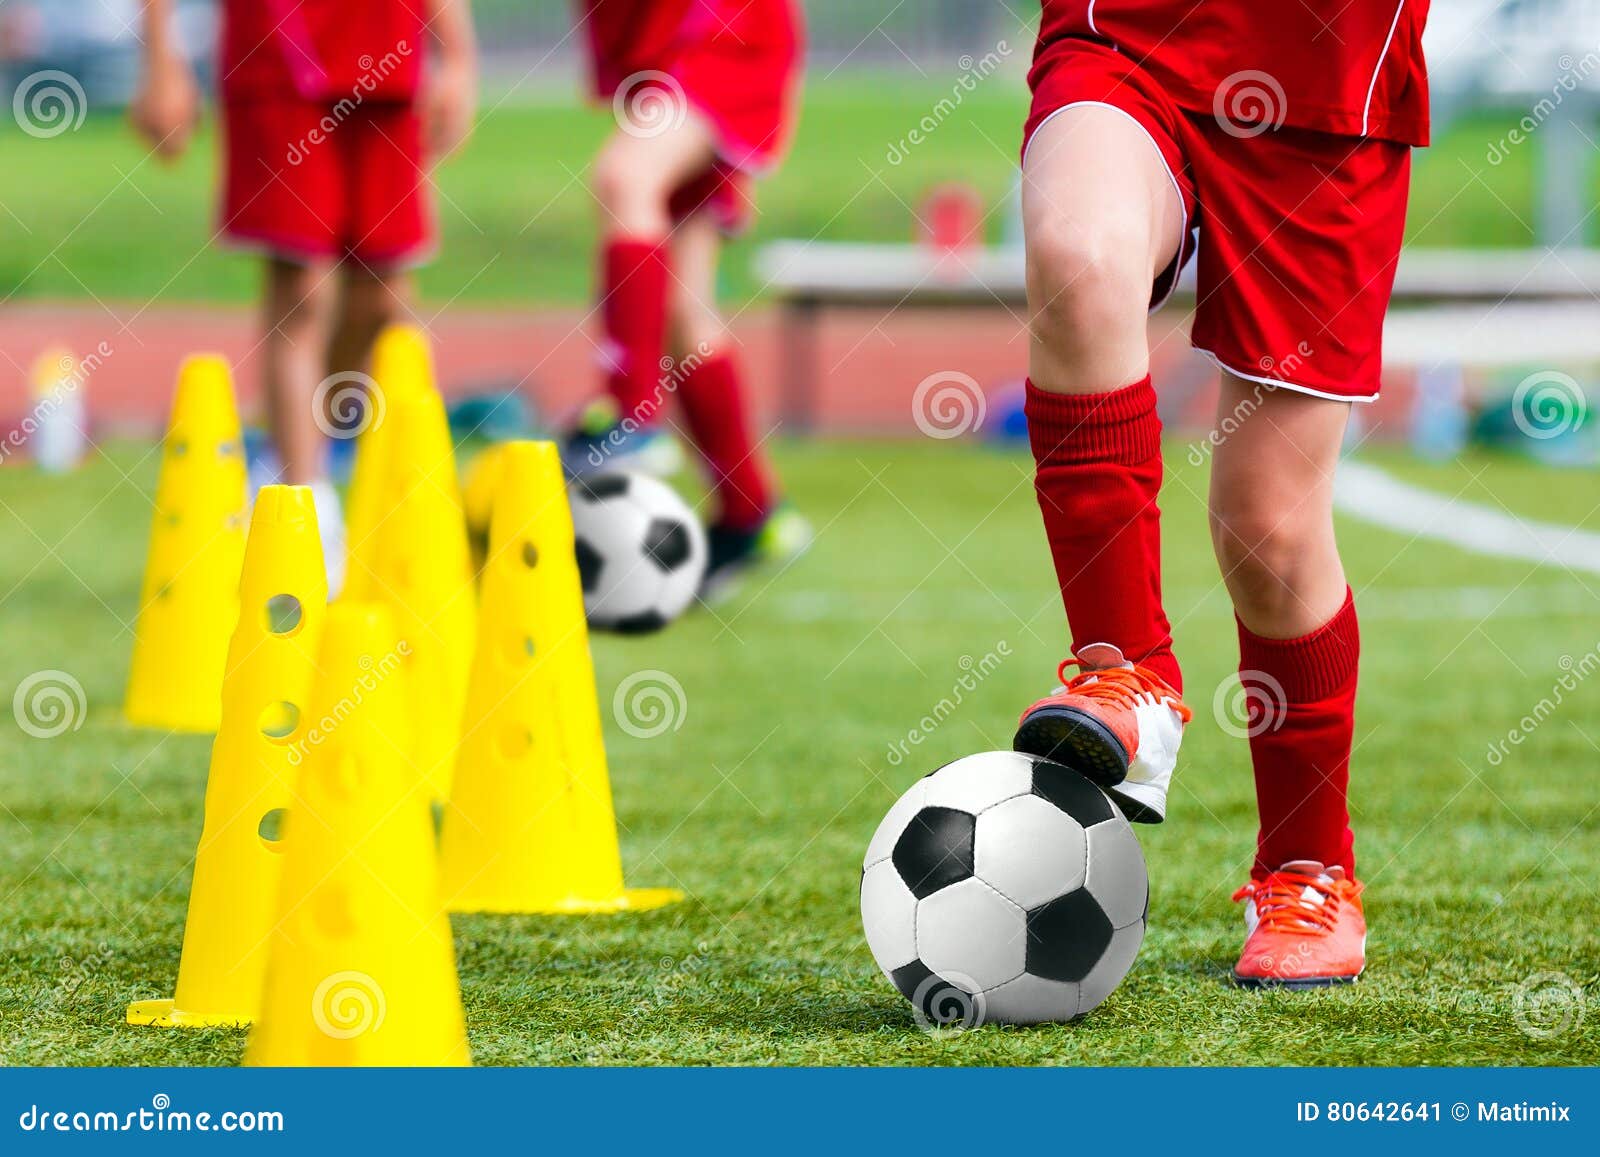 kids football soccer training.young athlete with football ball